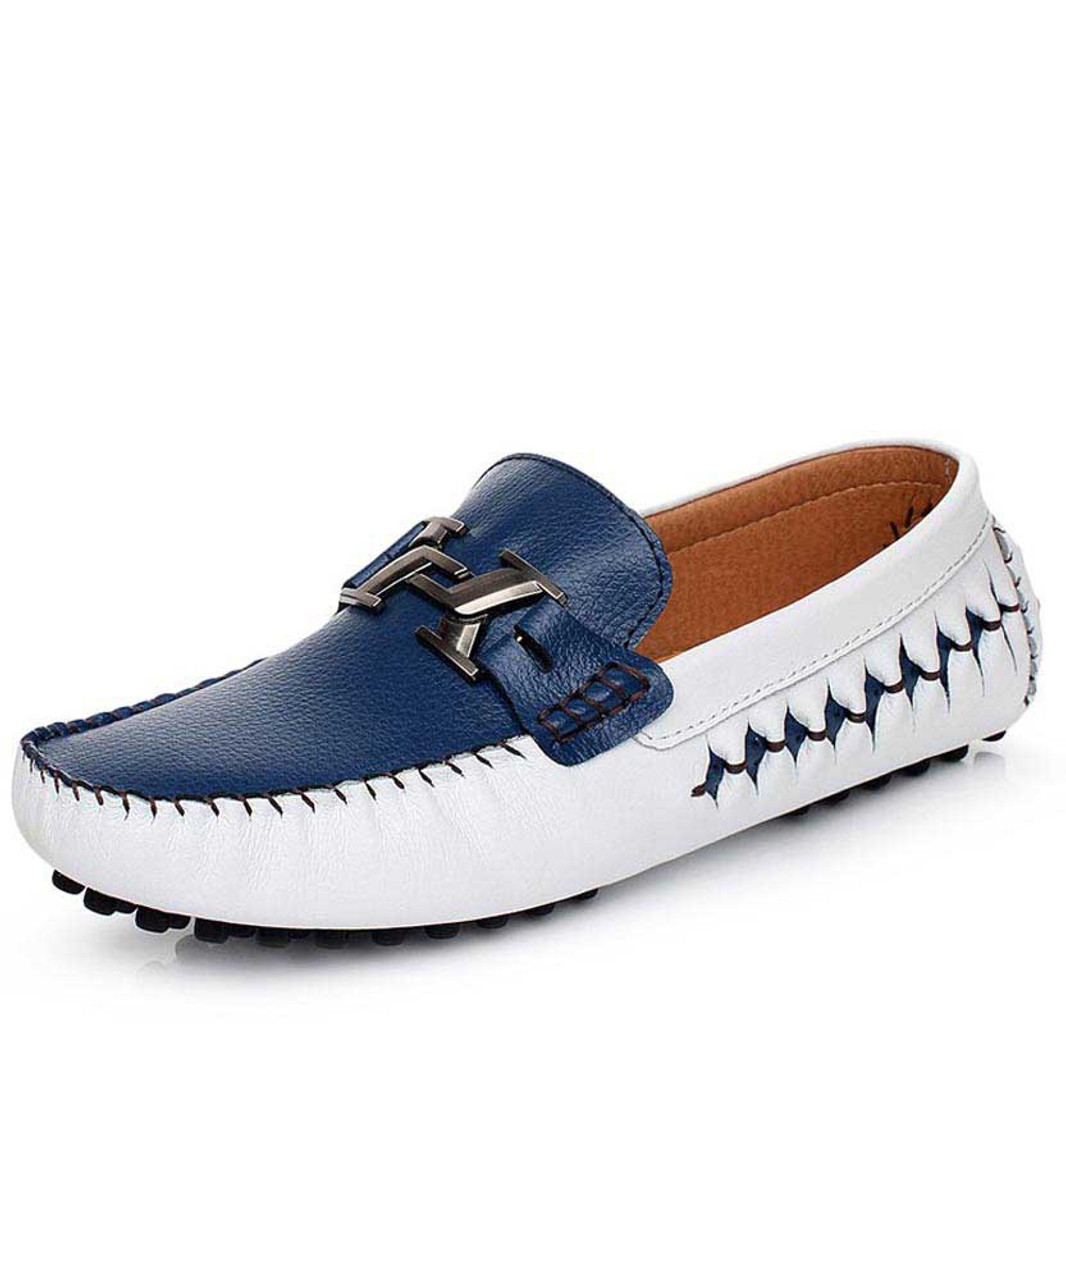 White blue metal buckle hollow leather slip on shoe loafer